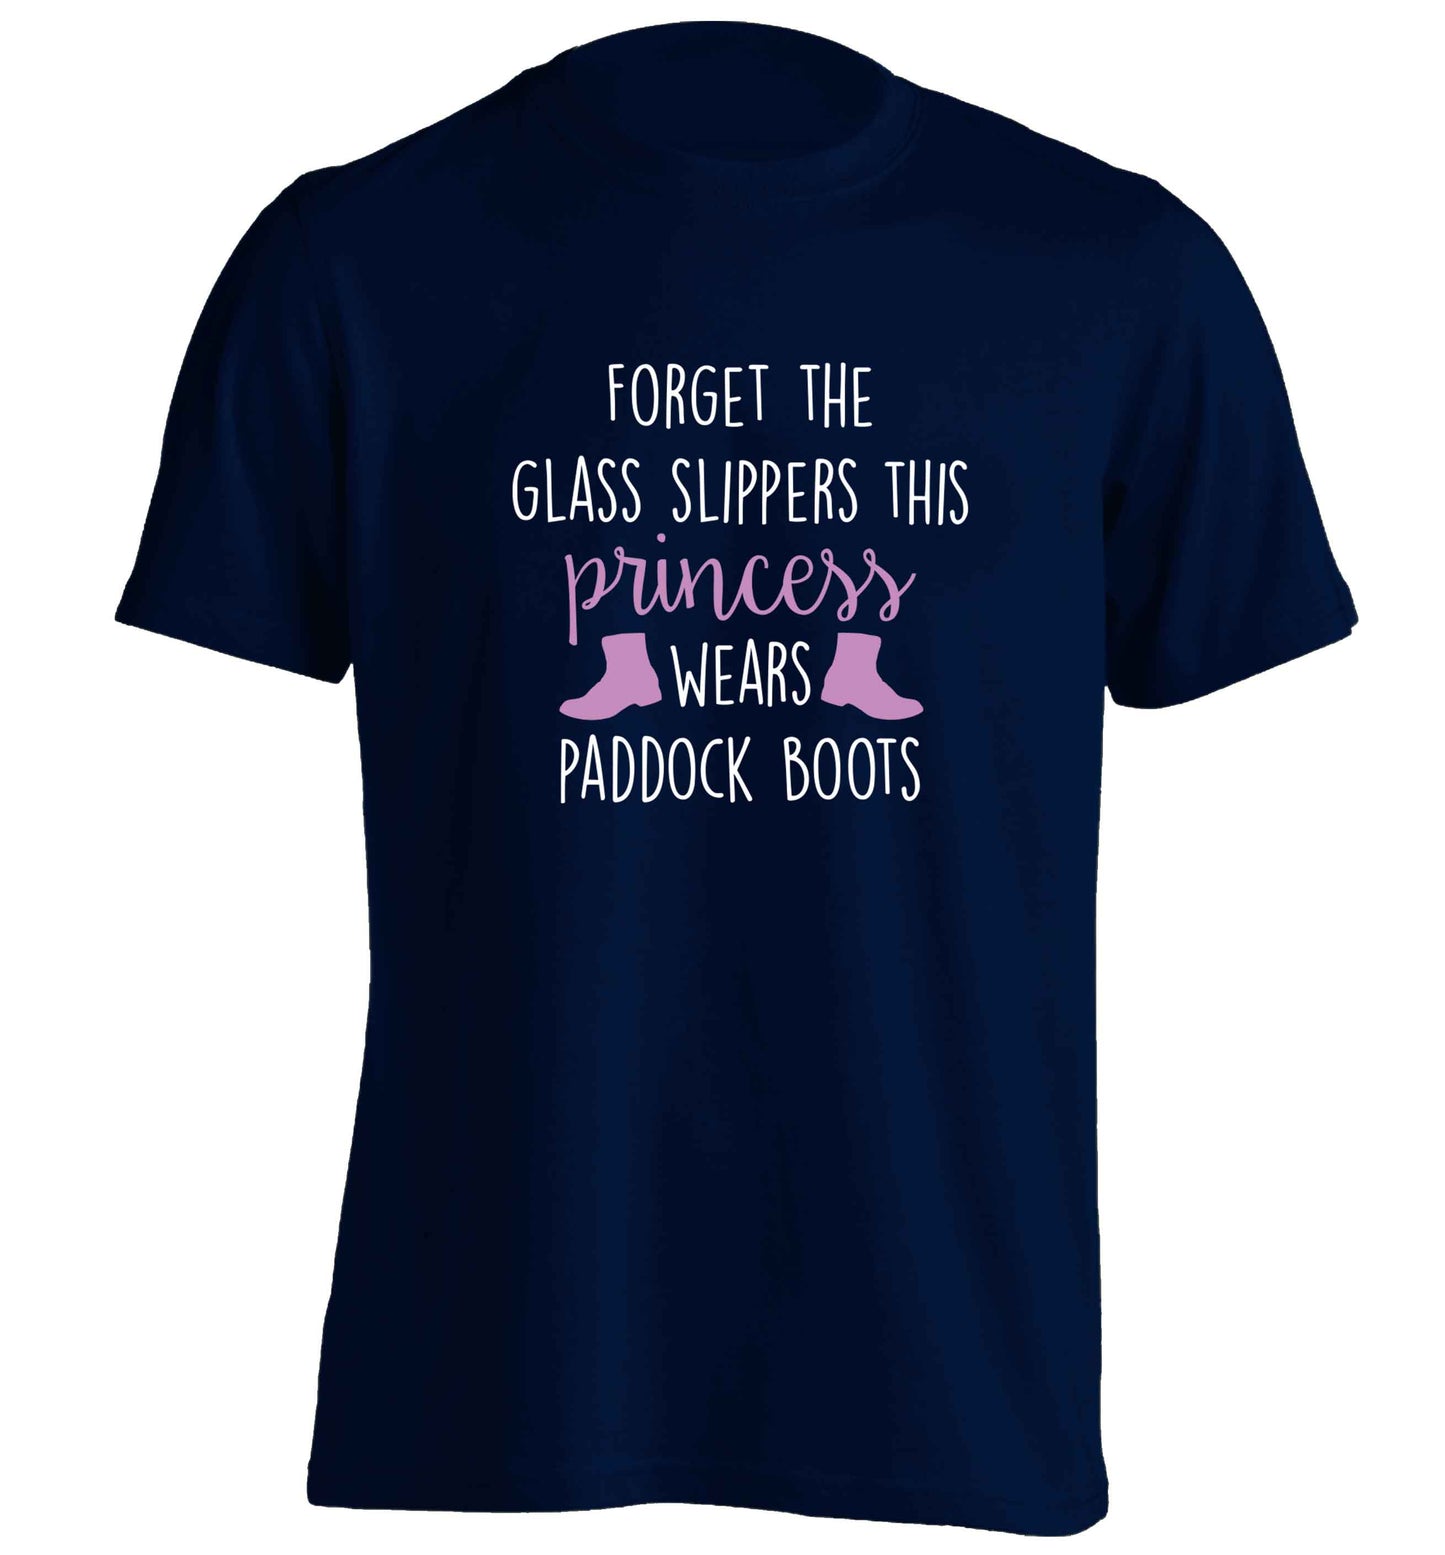 Forget the glass slippers this princess wears paddock boots adults unisex navy Tshirt 2XL